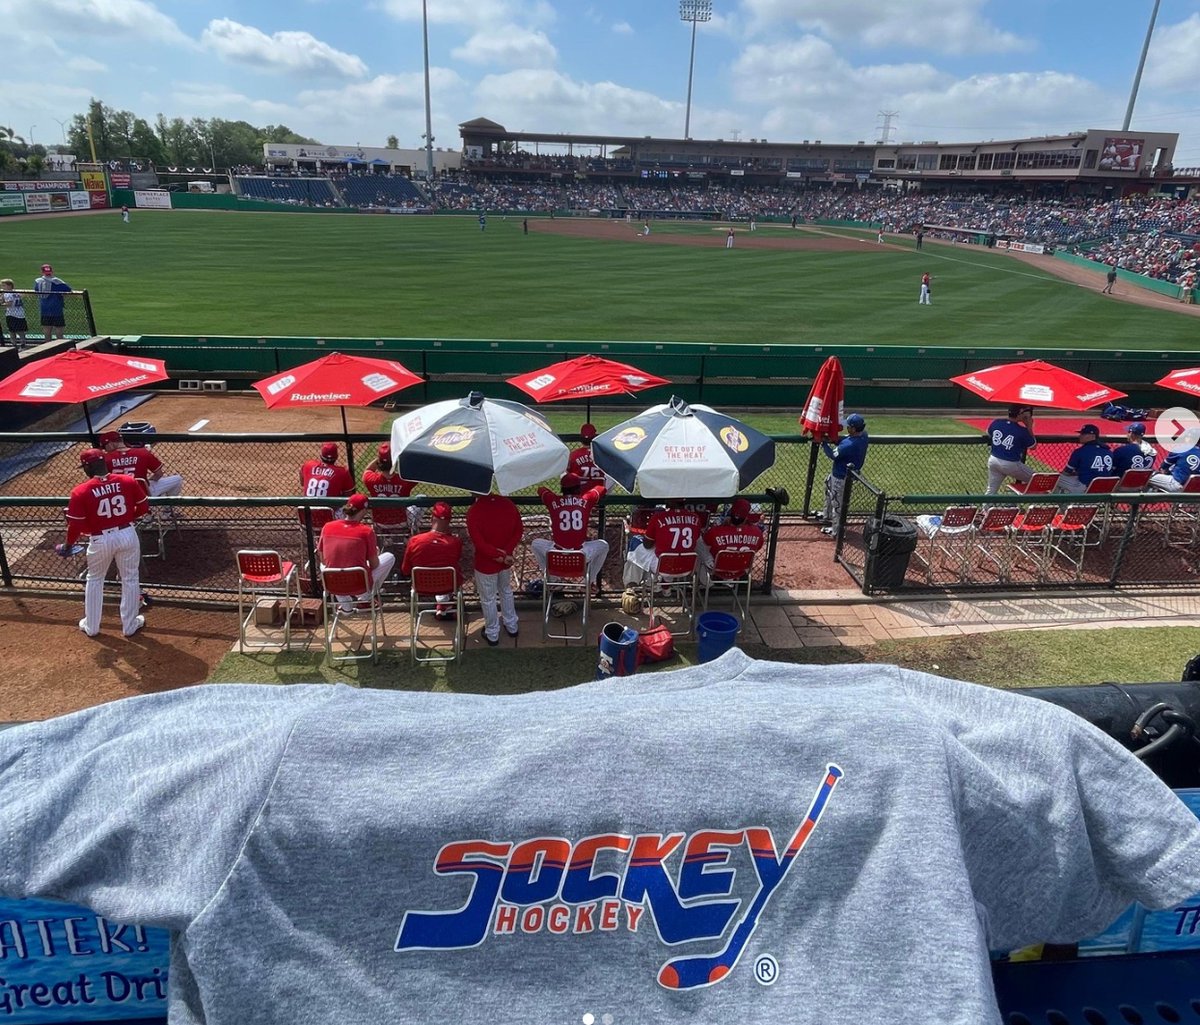 We love our hockey, but couldn't resist a chance to share this photo of Sockey being represented in Clearwater, FL the Spring Training home of the @Phillies! It's @MLB #OpeningDay and the NL champs have their eyes set on a #WorldSeries title. 🏒⚾️